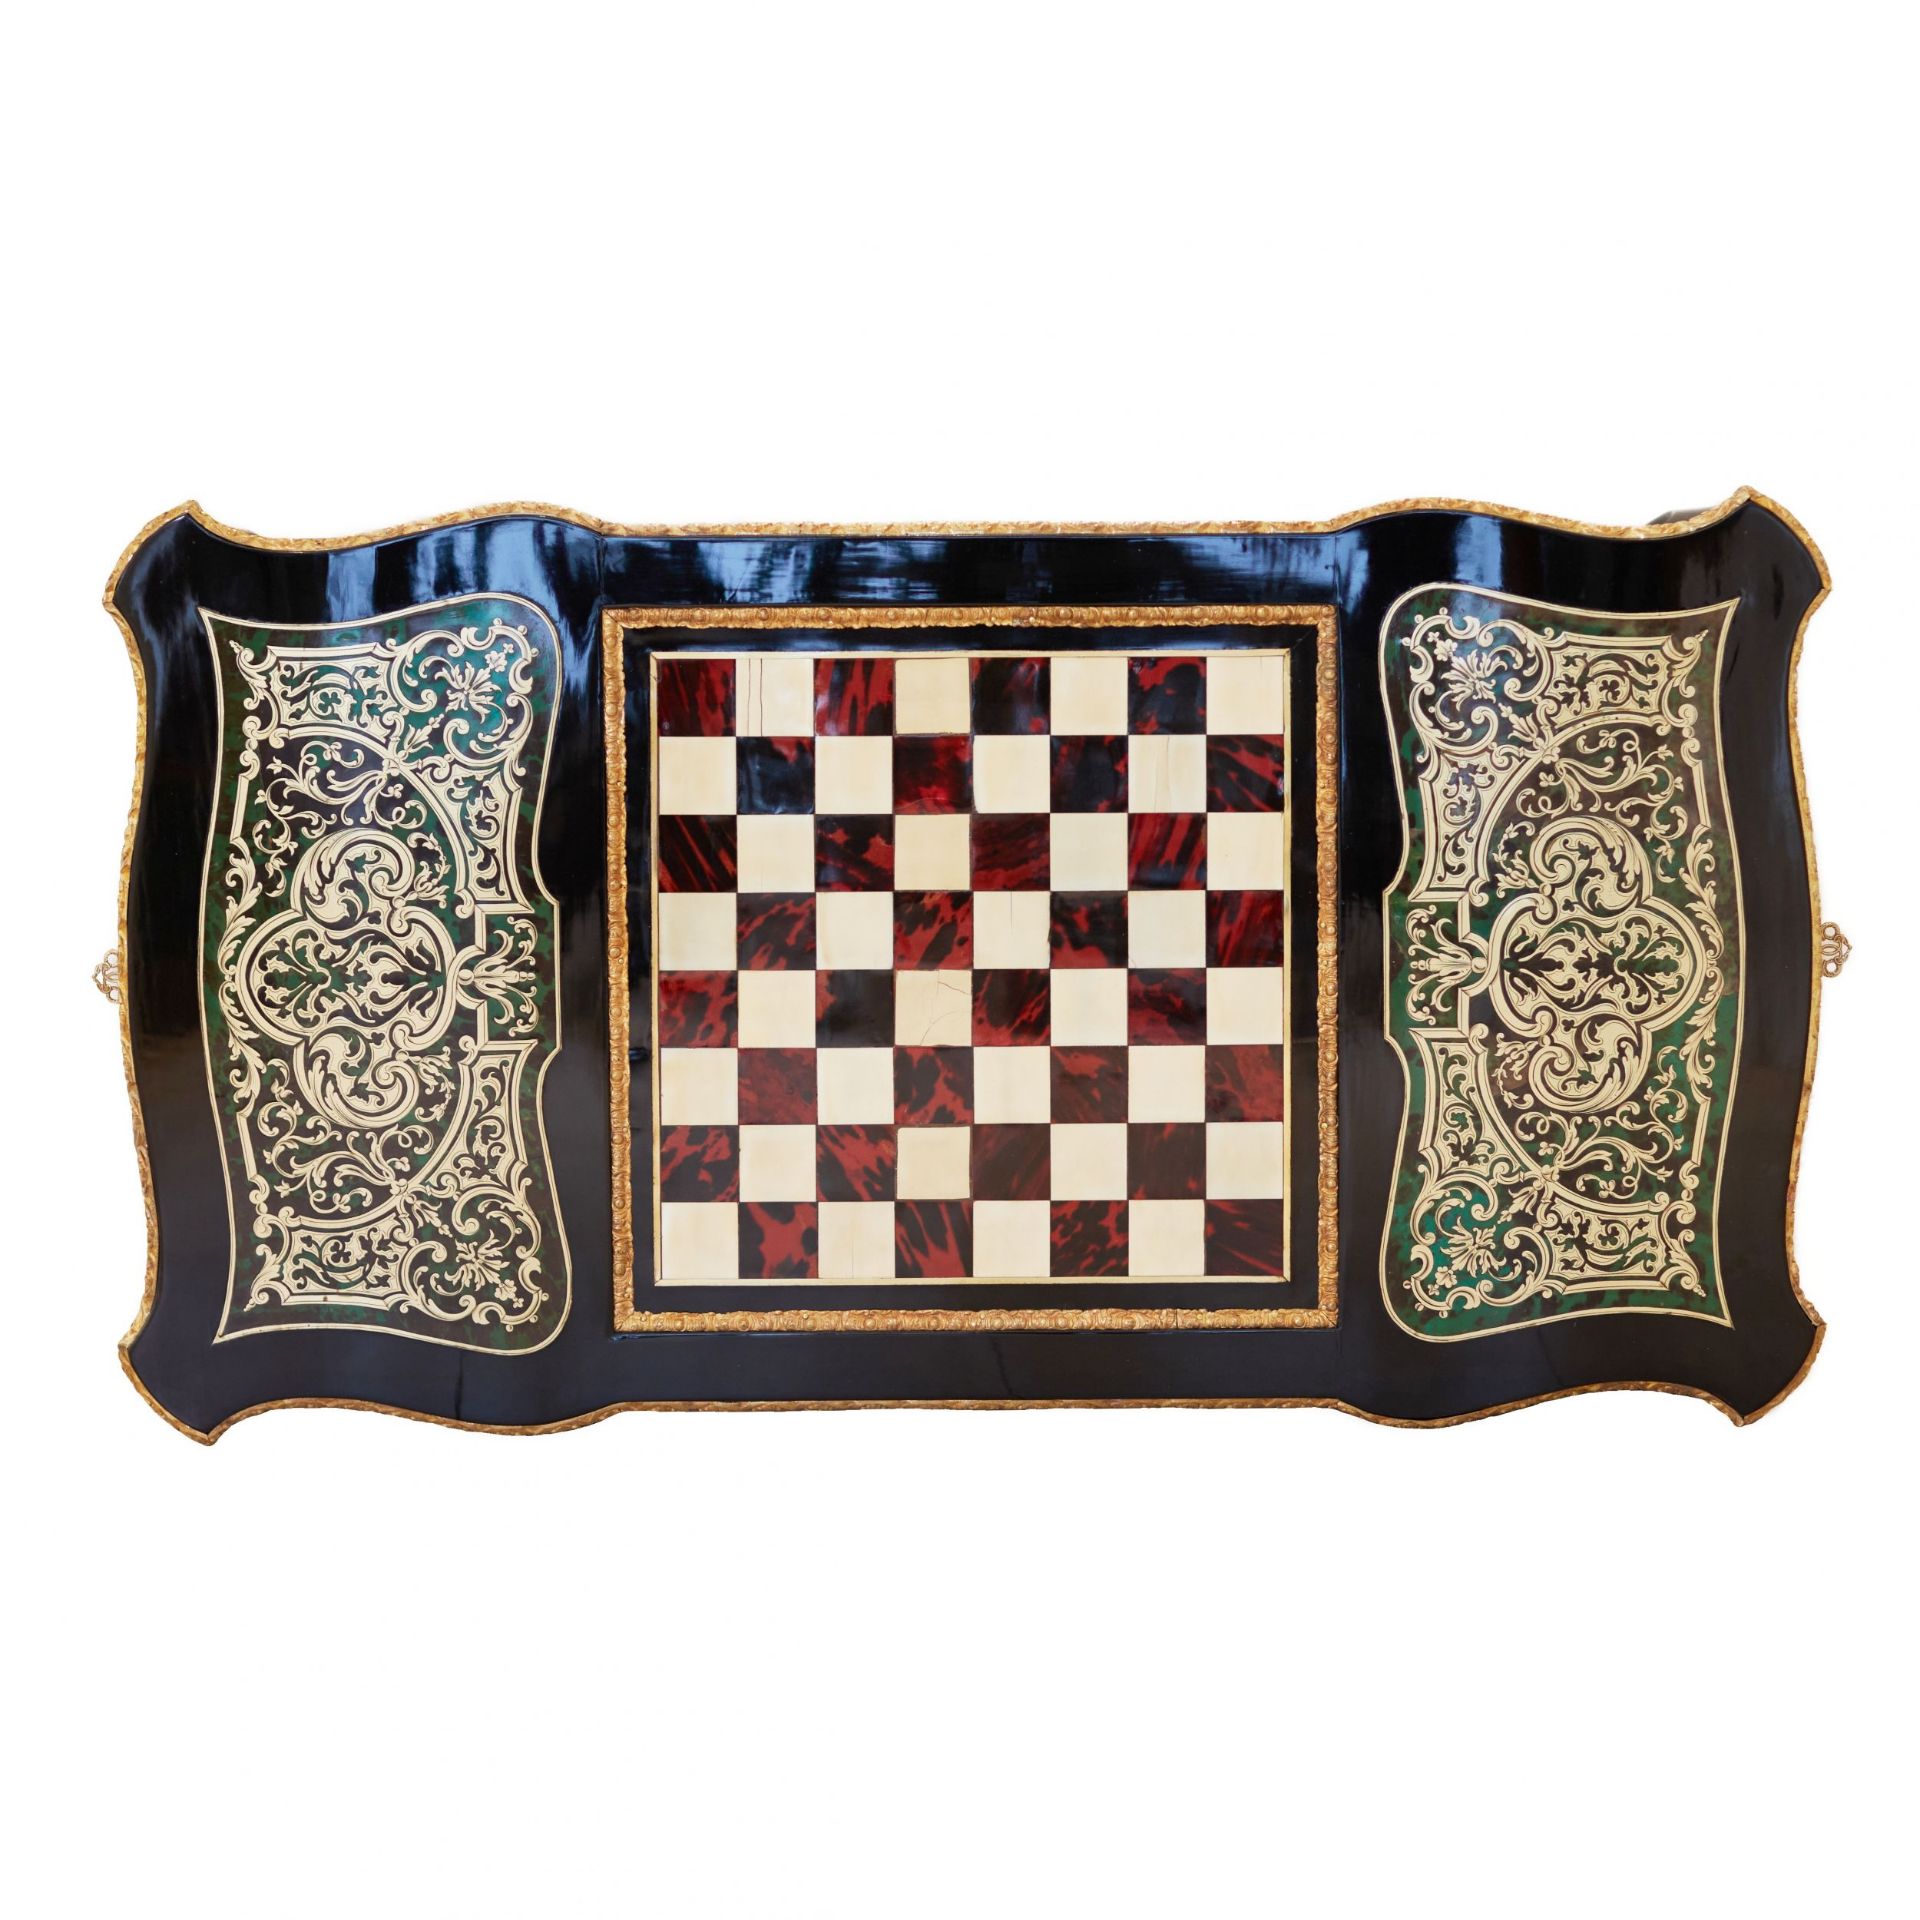 Game chess table in Boulle style. France. Turn of the 19th-20th century. - Image 7 of 11